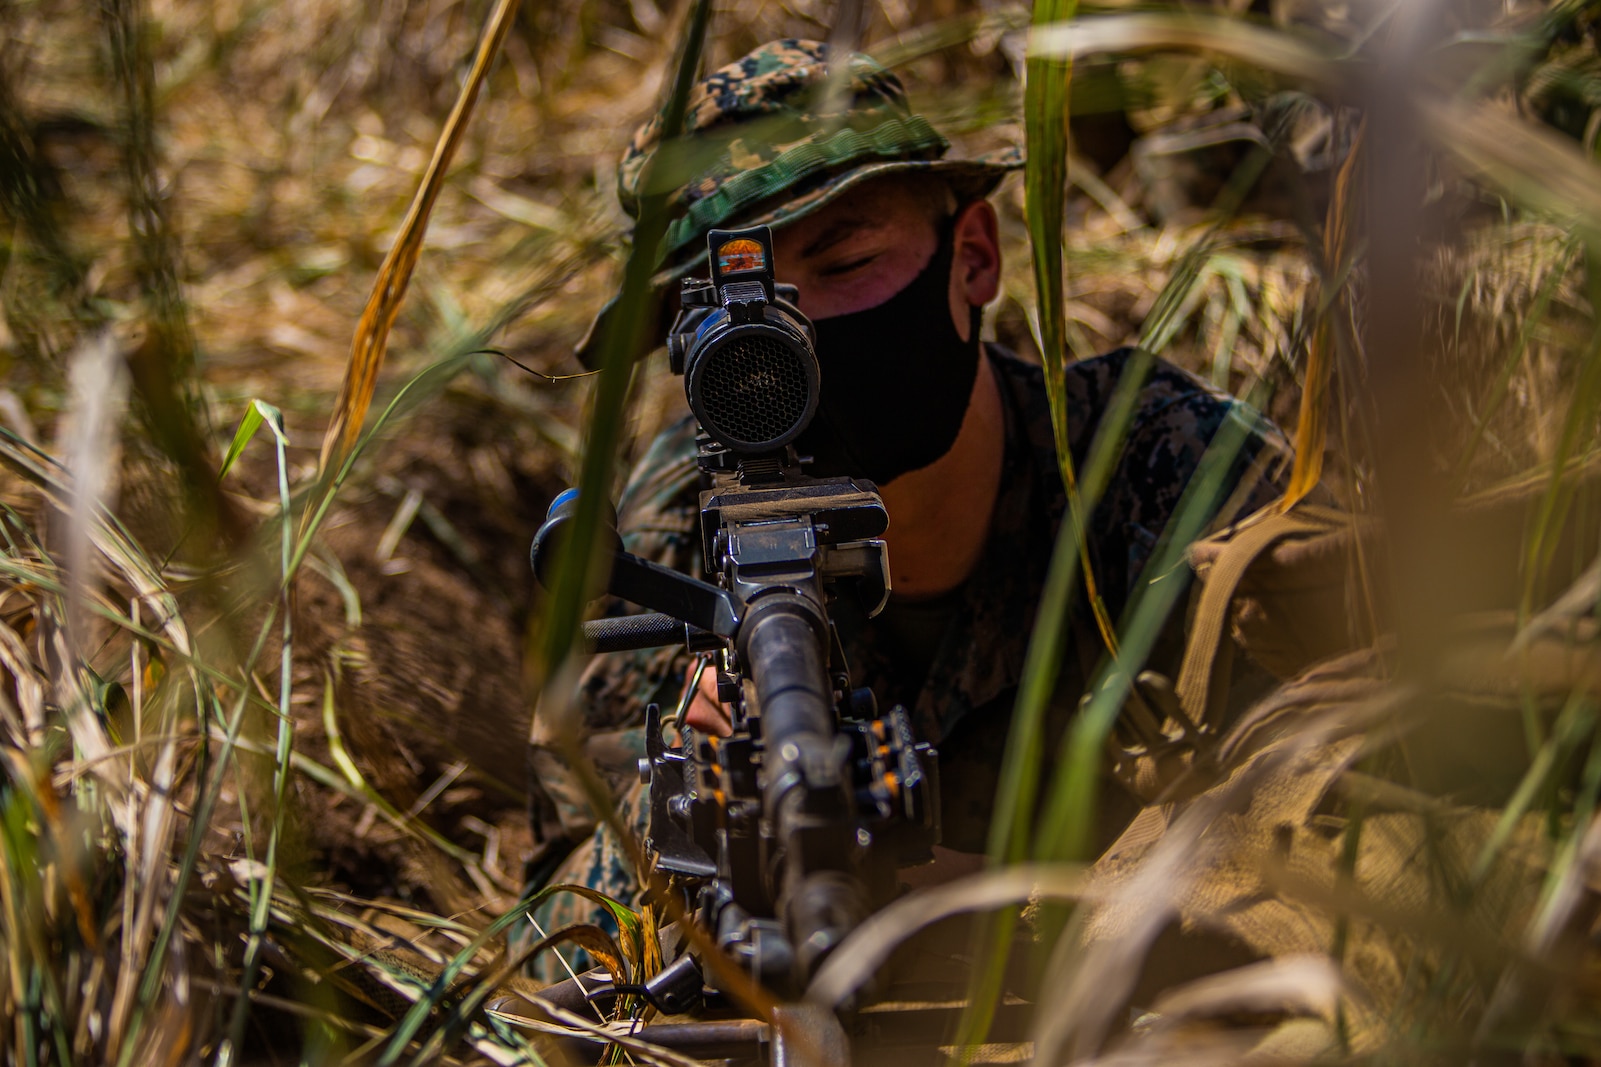 A U.S. Marine with Company F, 2nd Battalion, 3rd Marine Regiment, sights in with an M-240B machine gun while in the defense during Exercise Bougainville I at Marine Corps Training Area Bellows, Hawaii, Aug. 26, 2020. Bougainville I is designed to train and evaluate team leaders in small unit proficiency and increase the Battalion’s combat readiness. (U.S. Marine Corps photo by Cpl. Jacob Wilson)